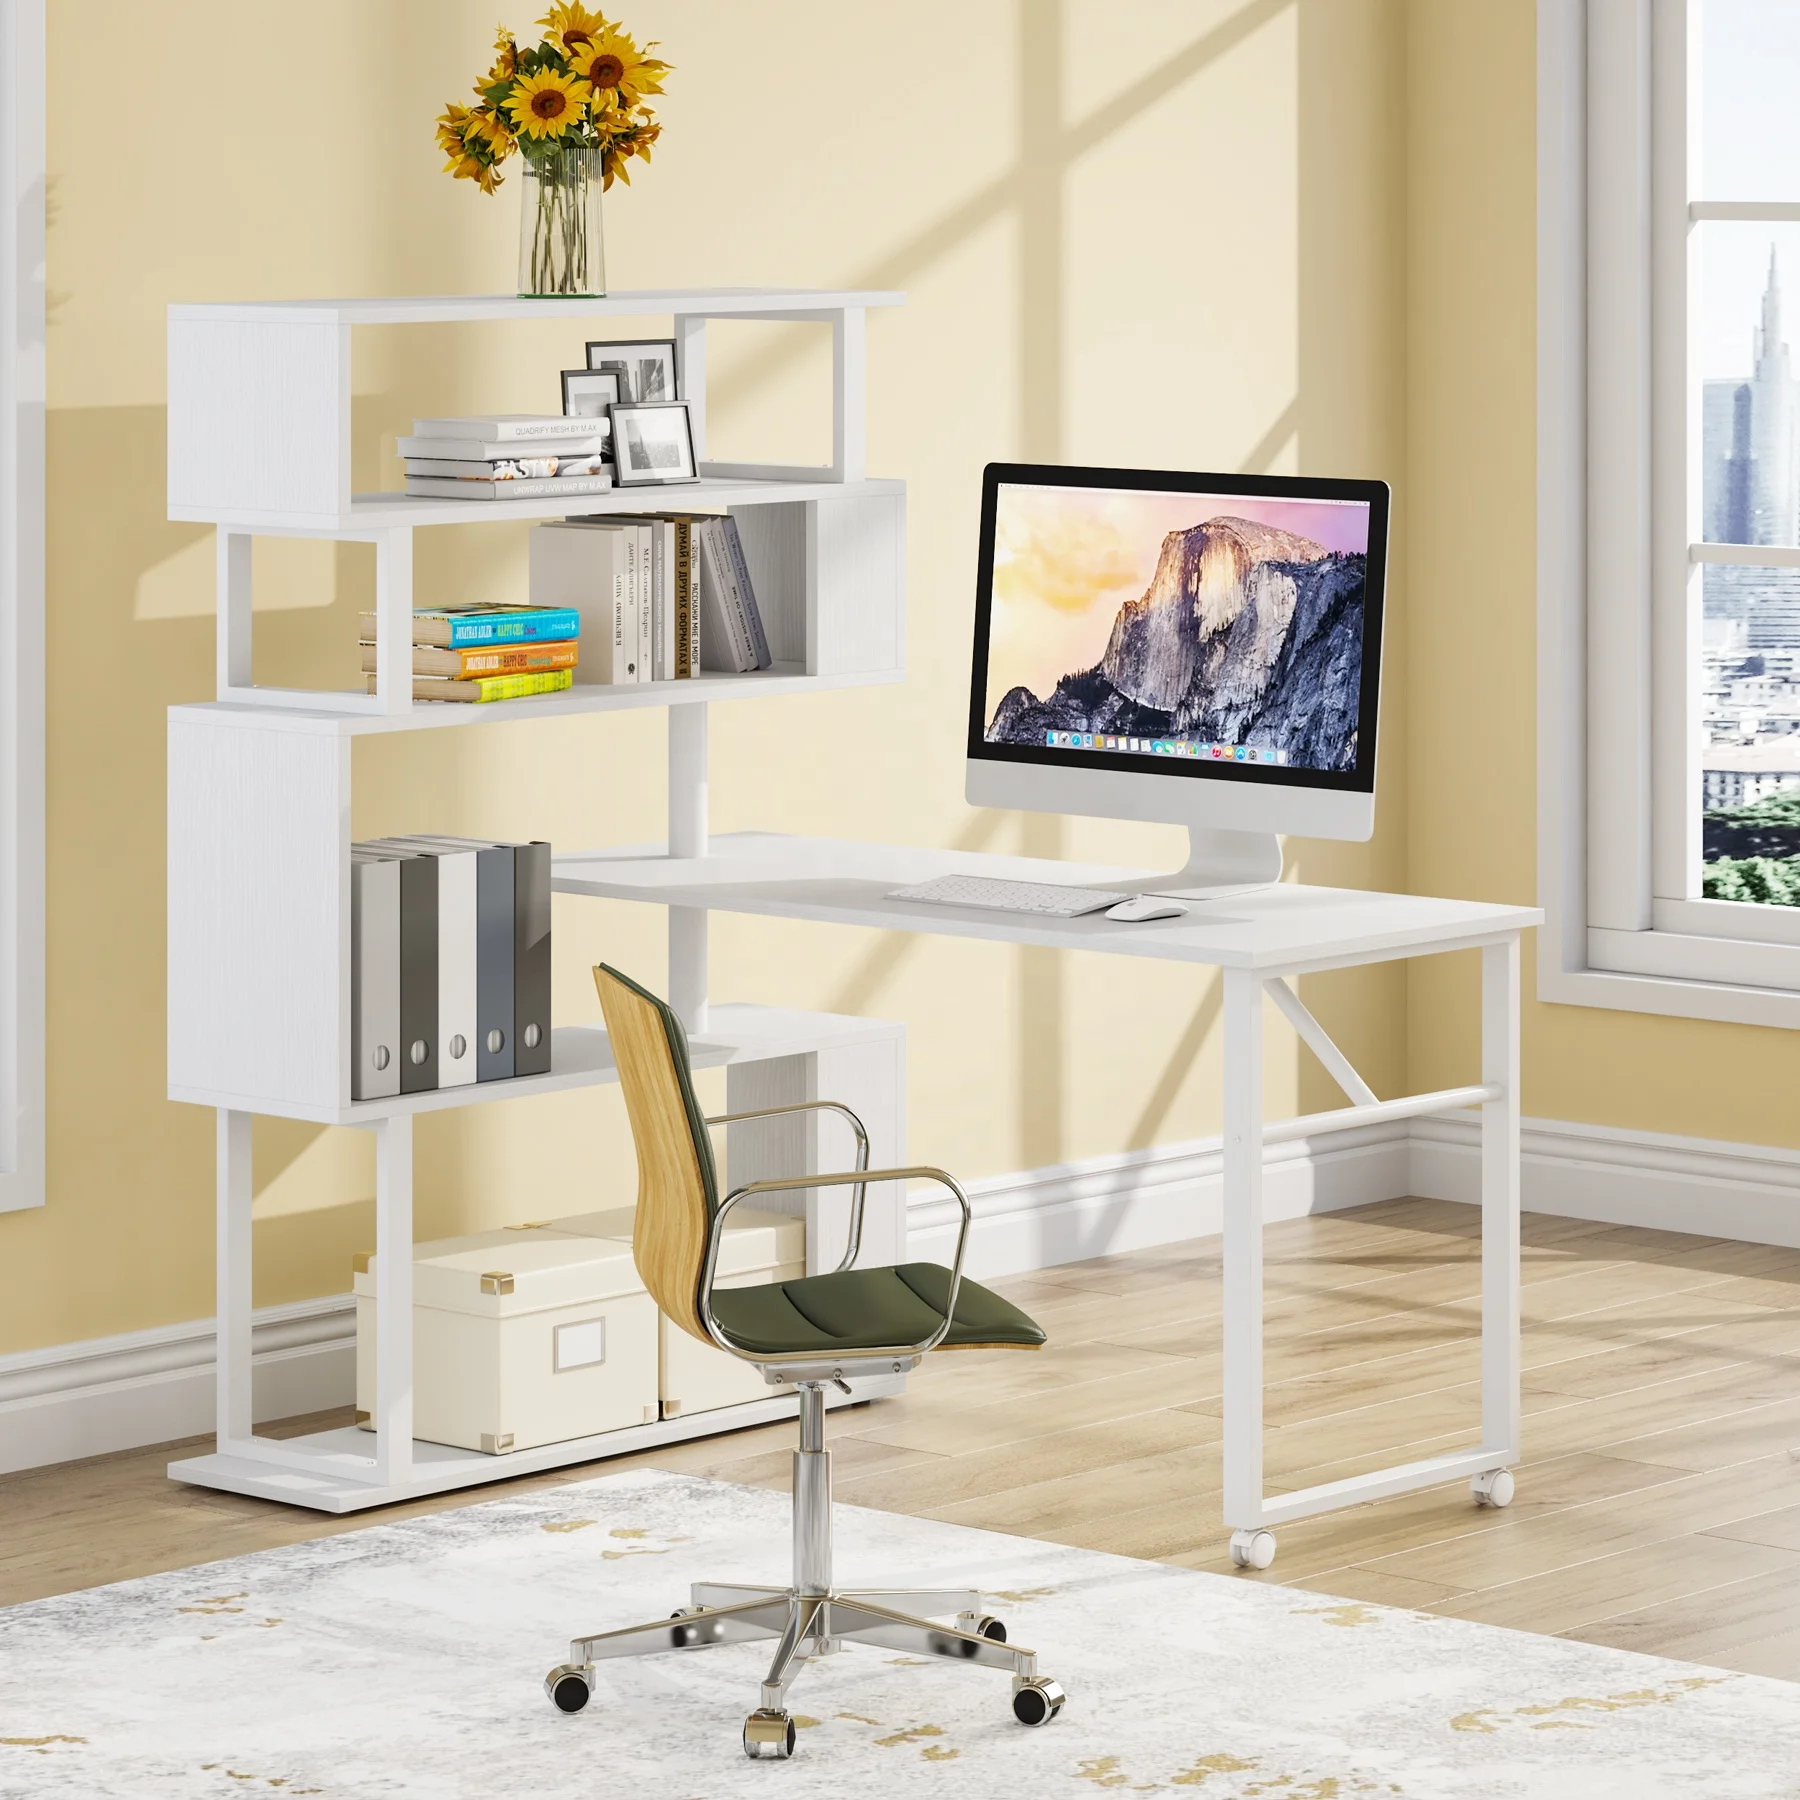 Tribesigns Metal Frame L shaped Writing Study Table Large Corner Workstation Wood Computer Laptop Desk for Home Office